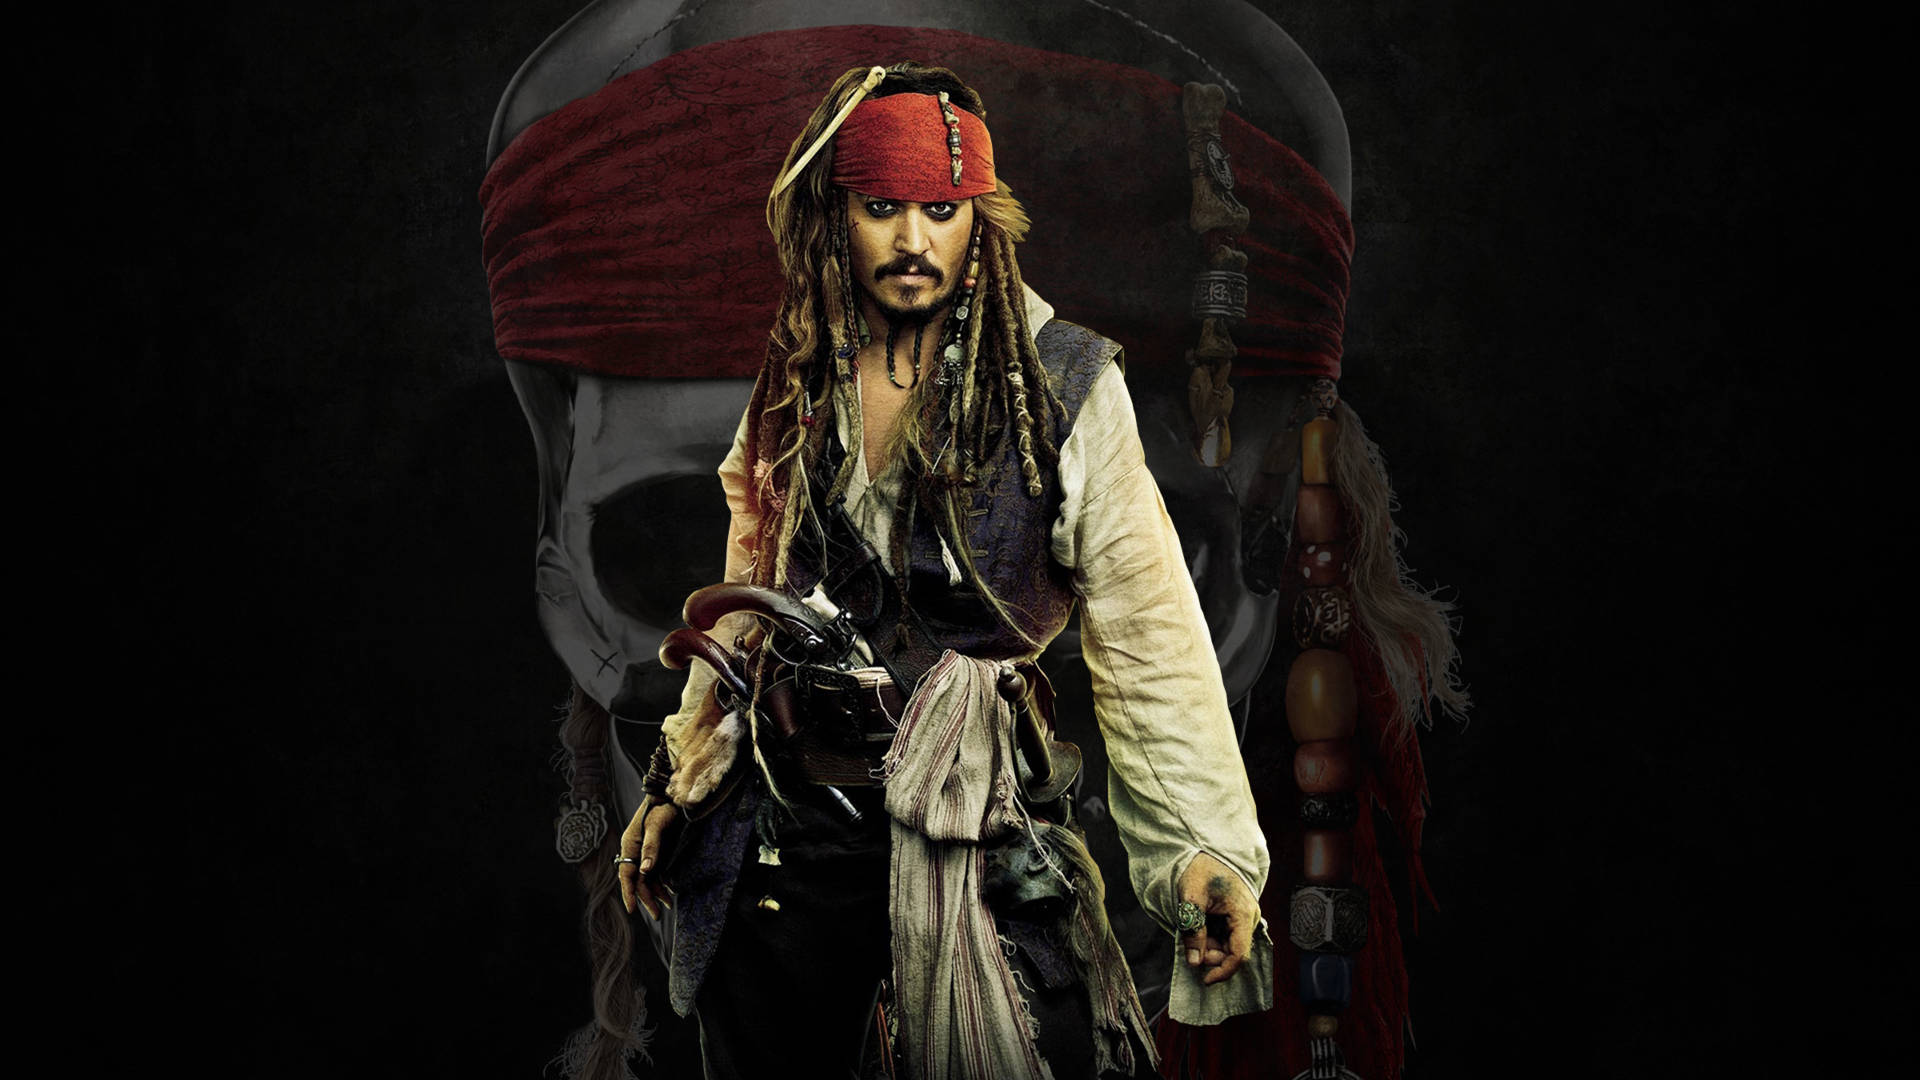 Free Pirates Of The Caribbean Wallpaper Downloads, [100+] Pirates Of The Caribbean  Wallpapers for FREE 